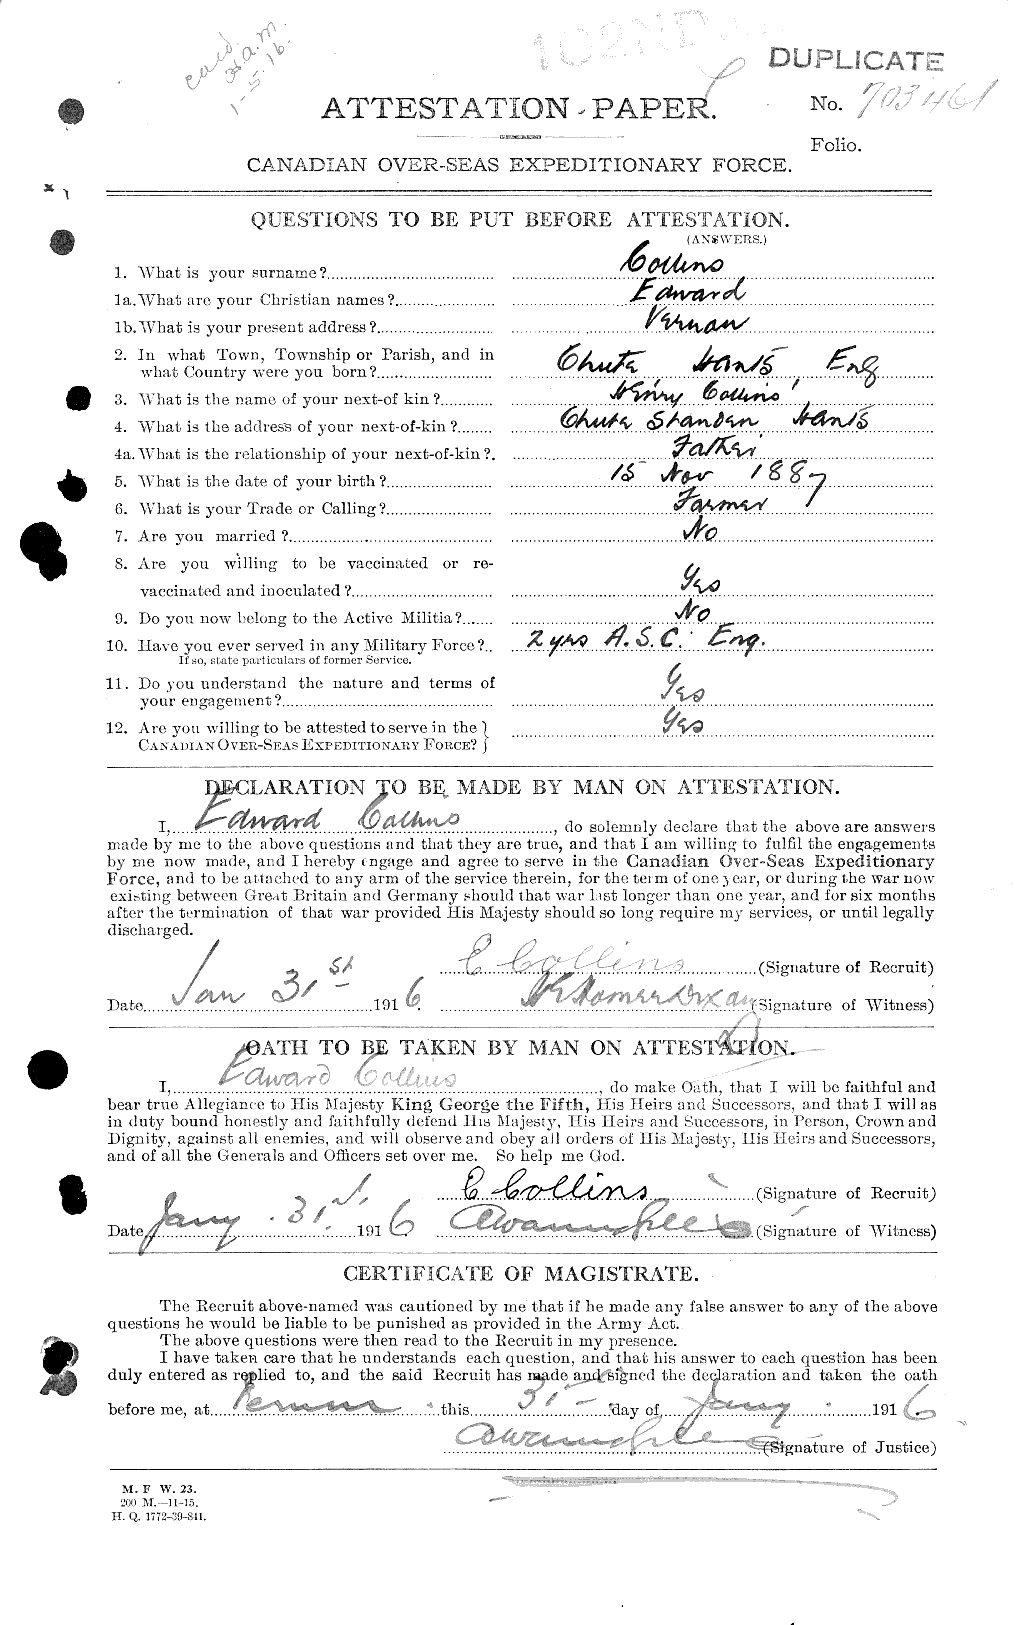 Personnel Records of the First World War - CEF 037739a